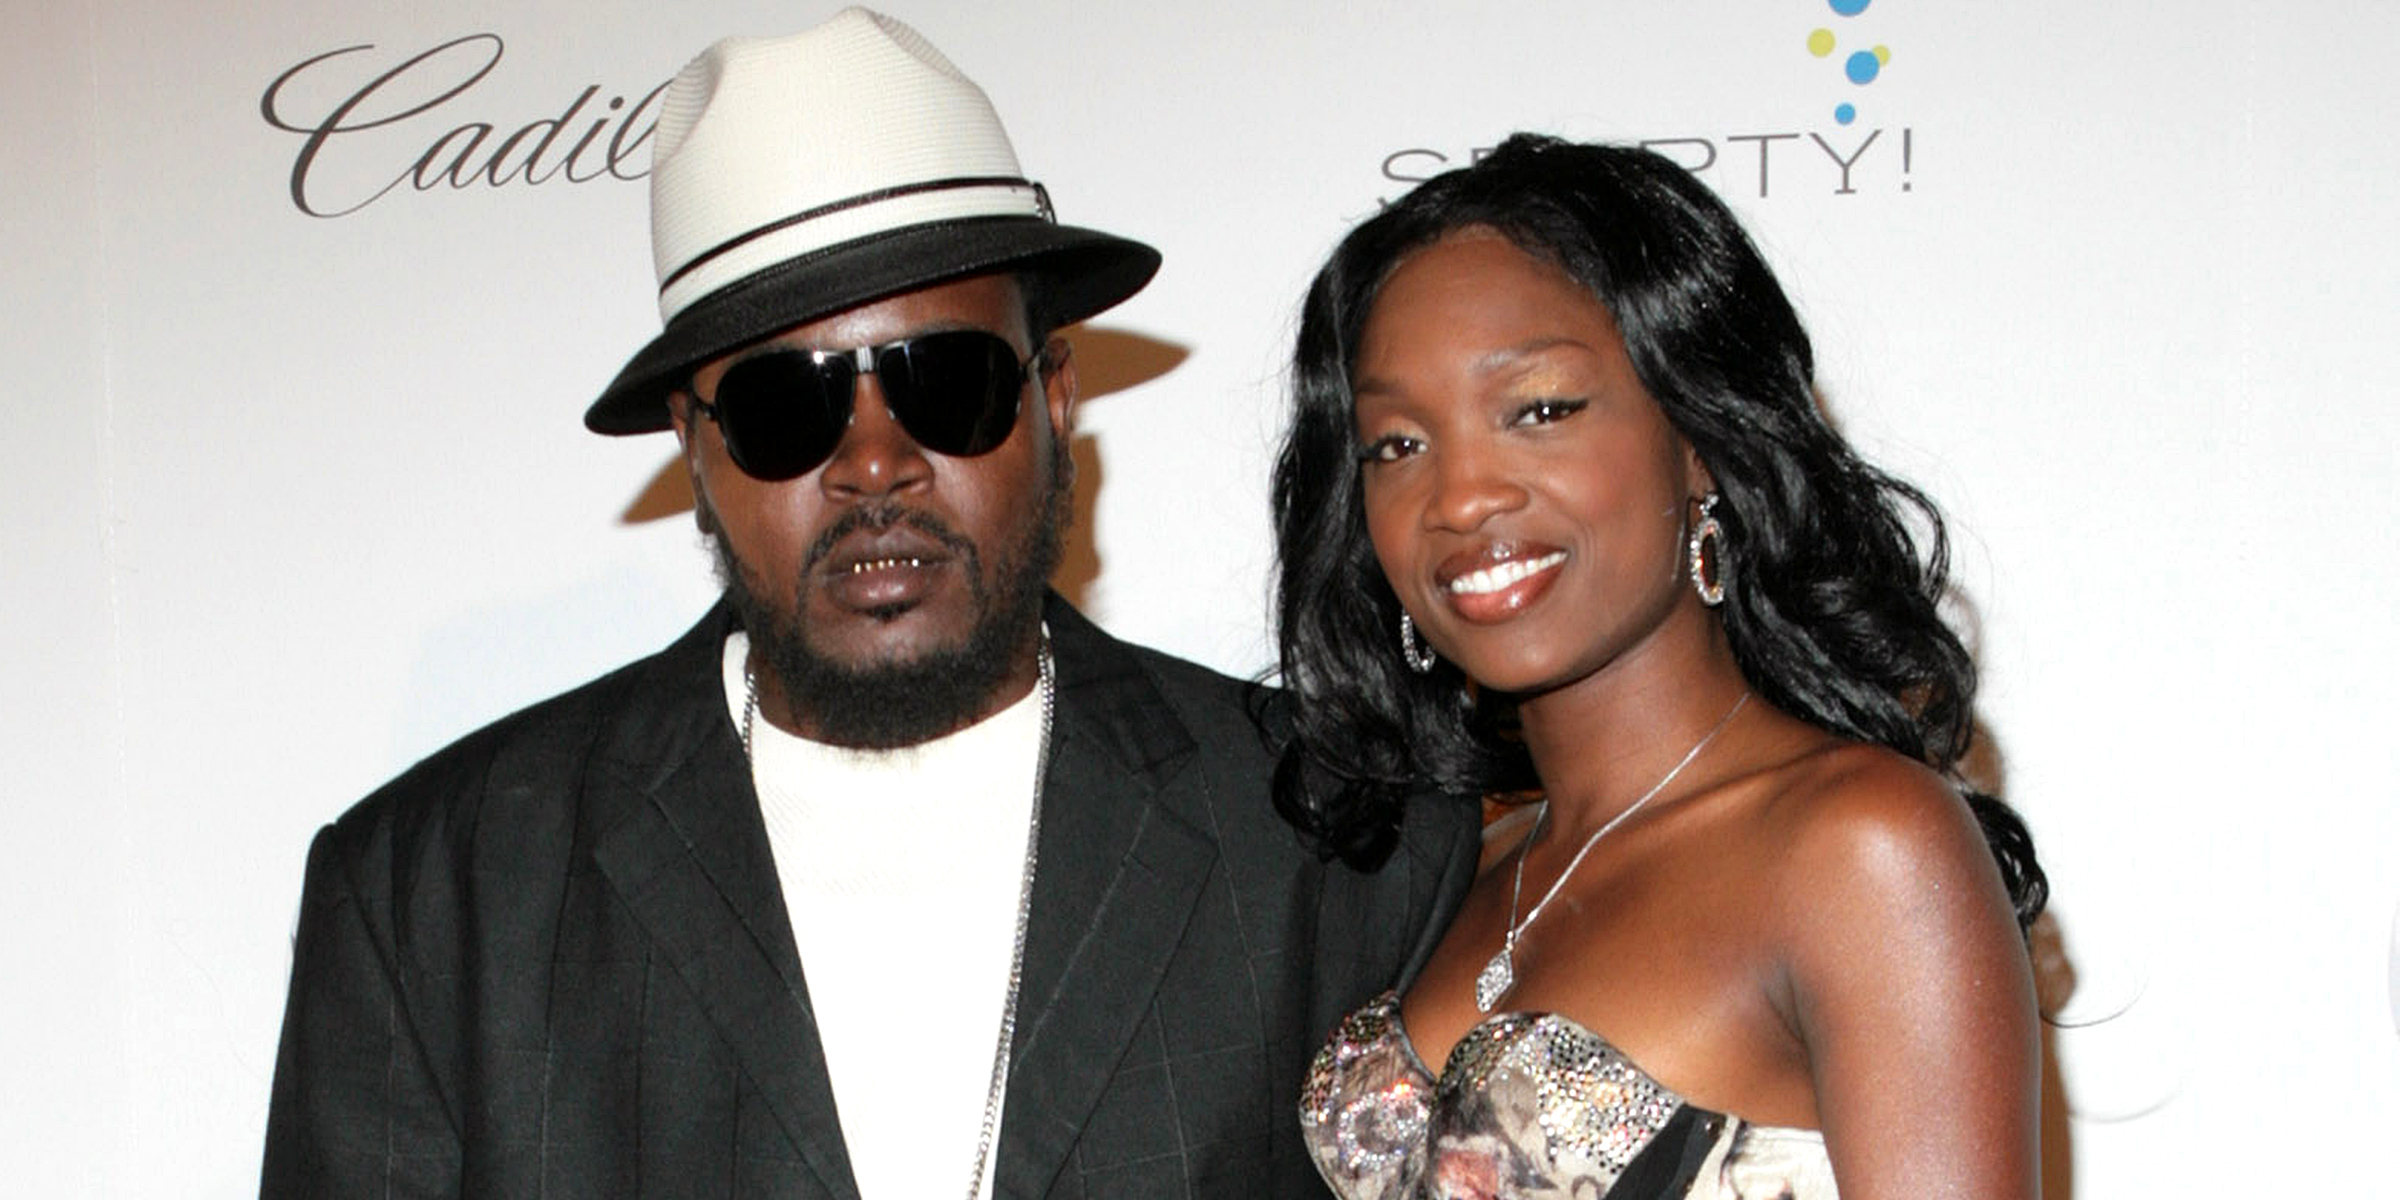 Trick Daddy and Joy Young | Source: Getty Images